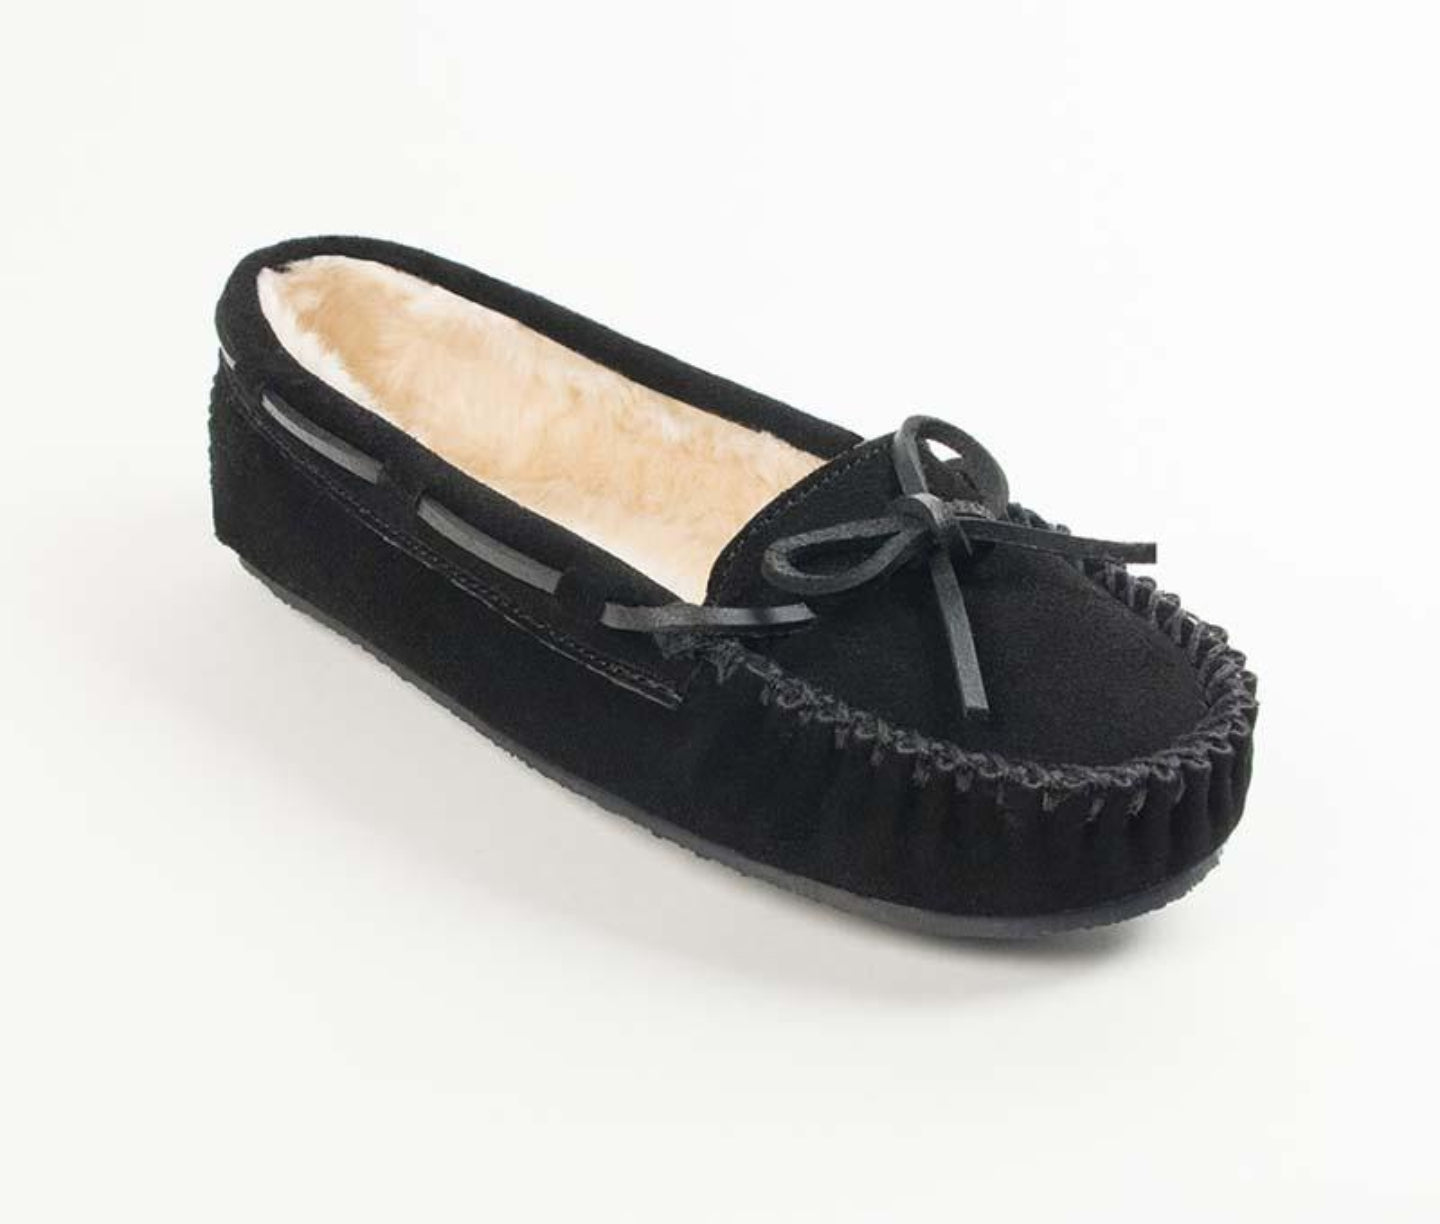 Cally Slipper in Black from 3/4 Angle View